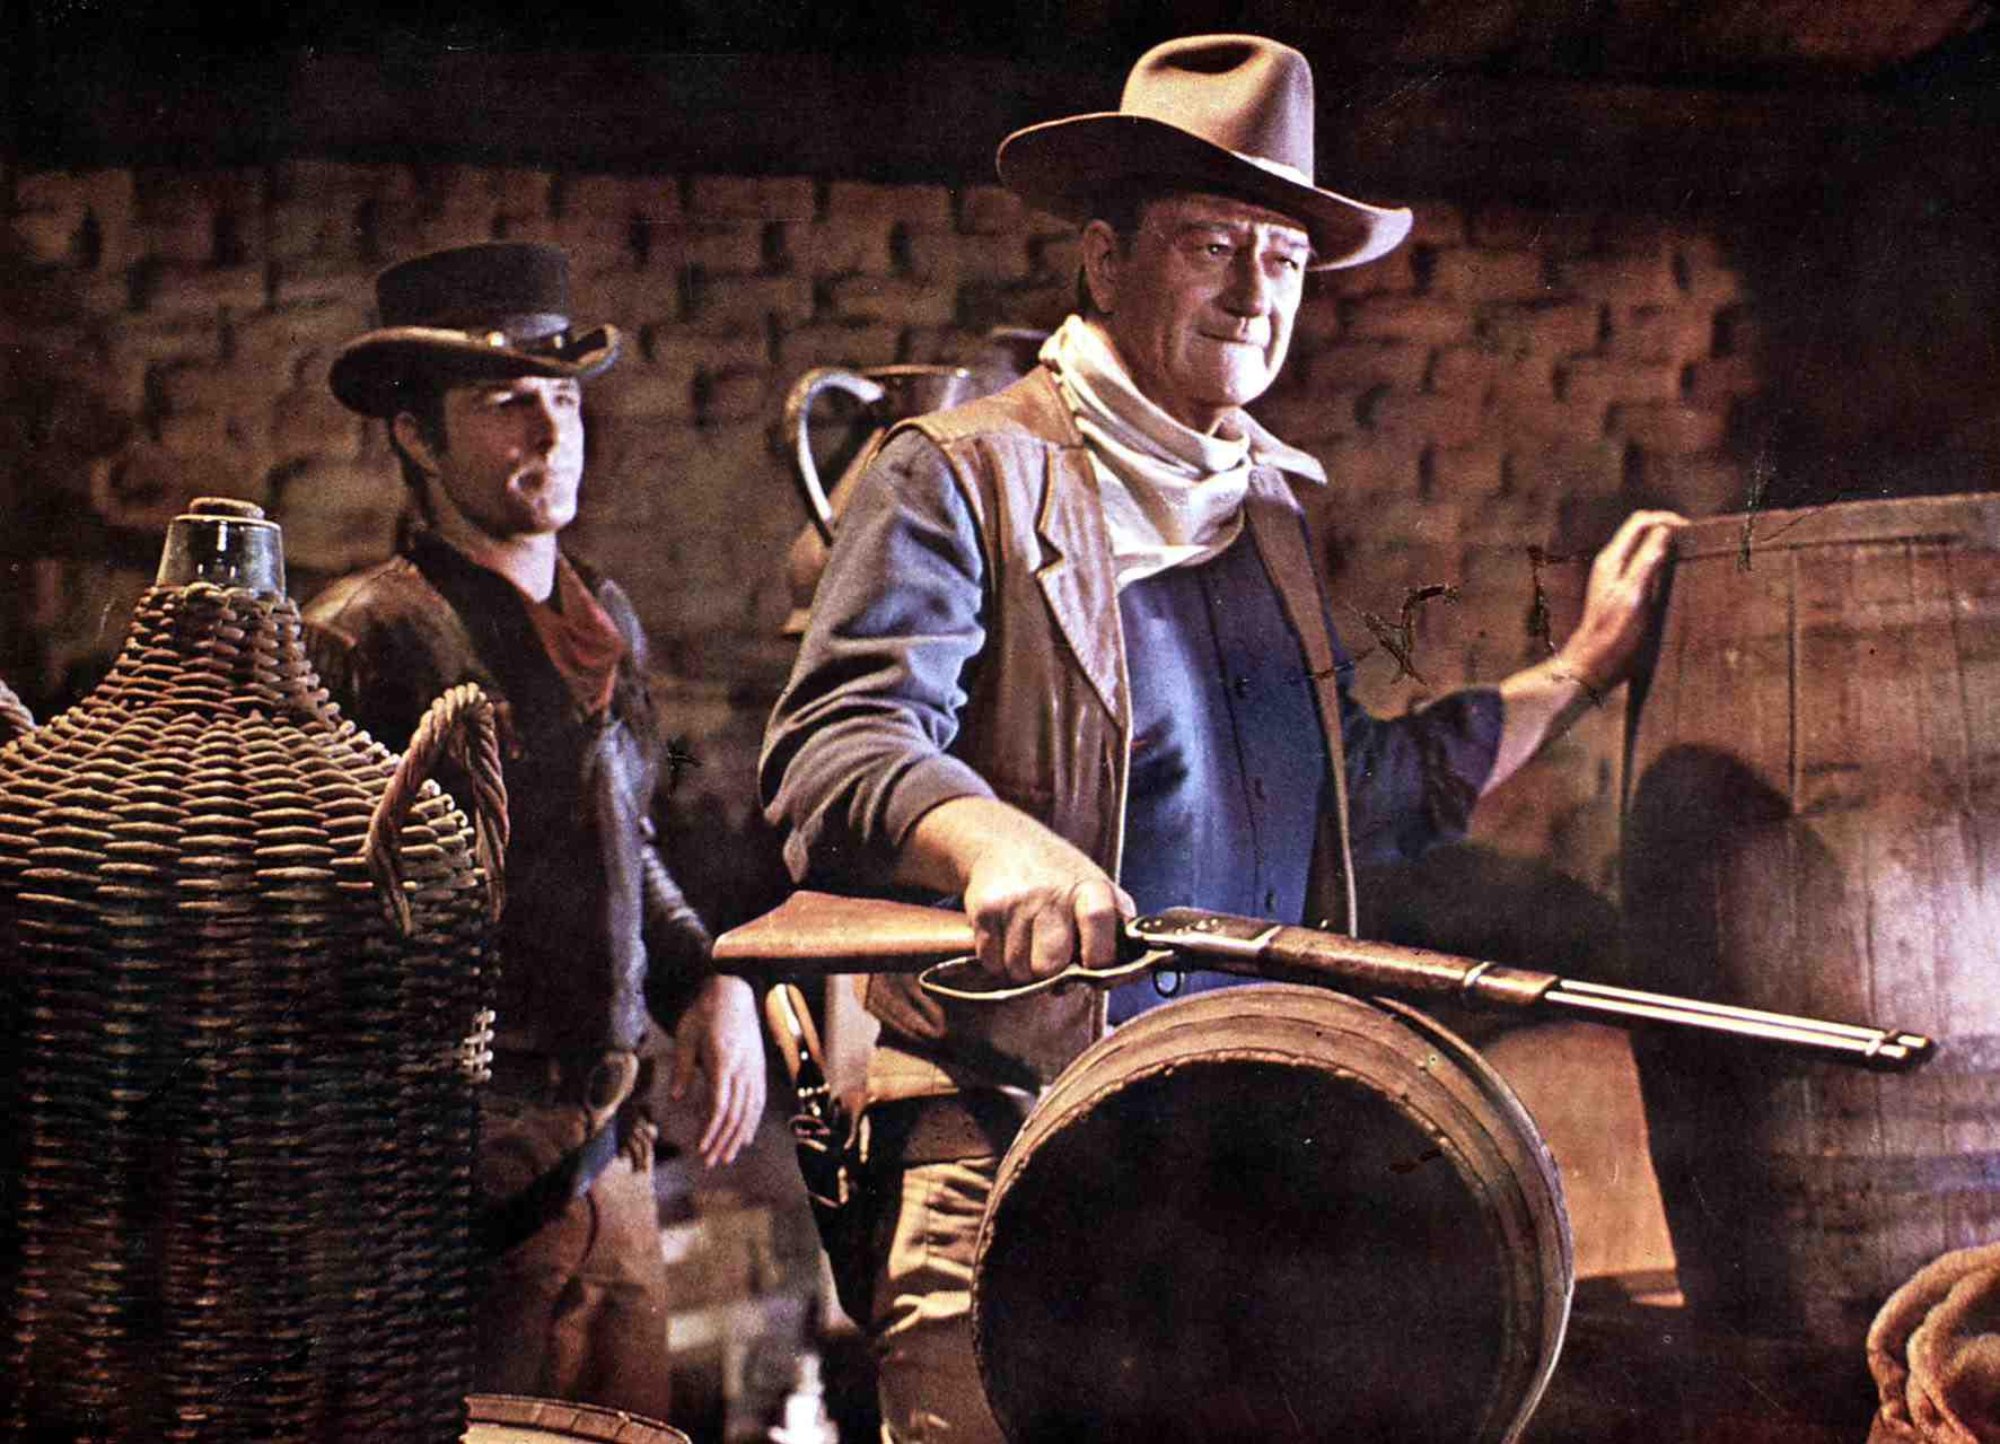 'El Dorado' James Caan as Mississippi and John Wayne as Cole Thornton wearing Western outfits surrounded by barrels